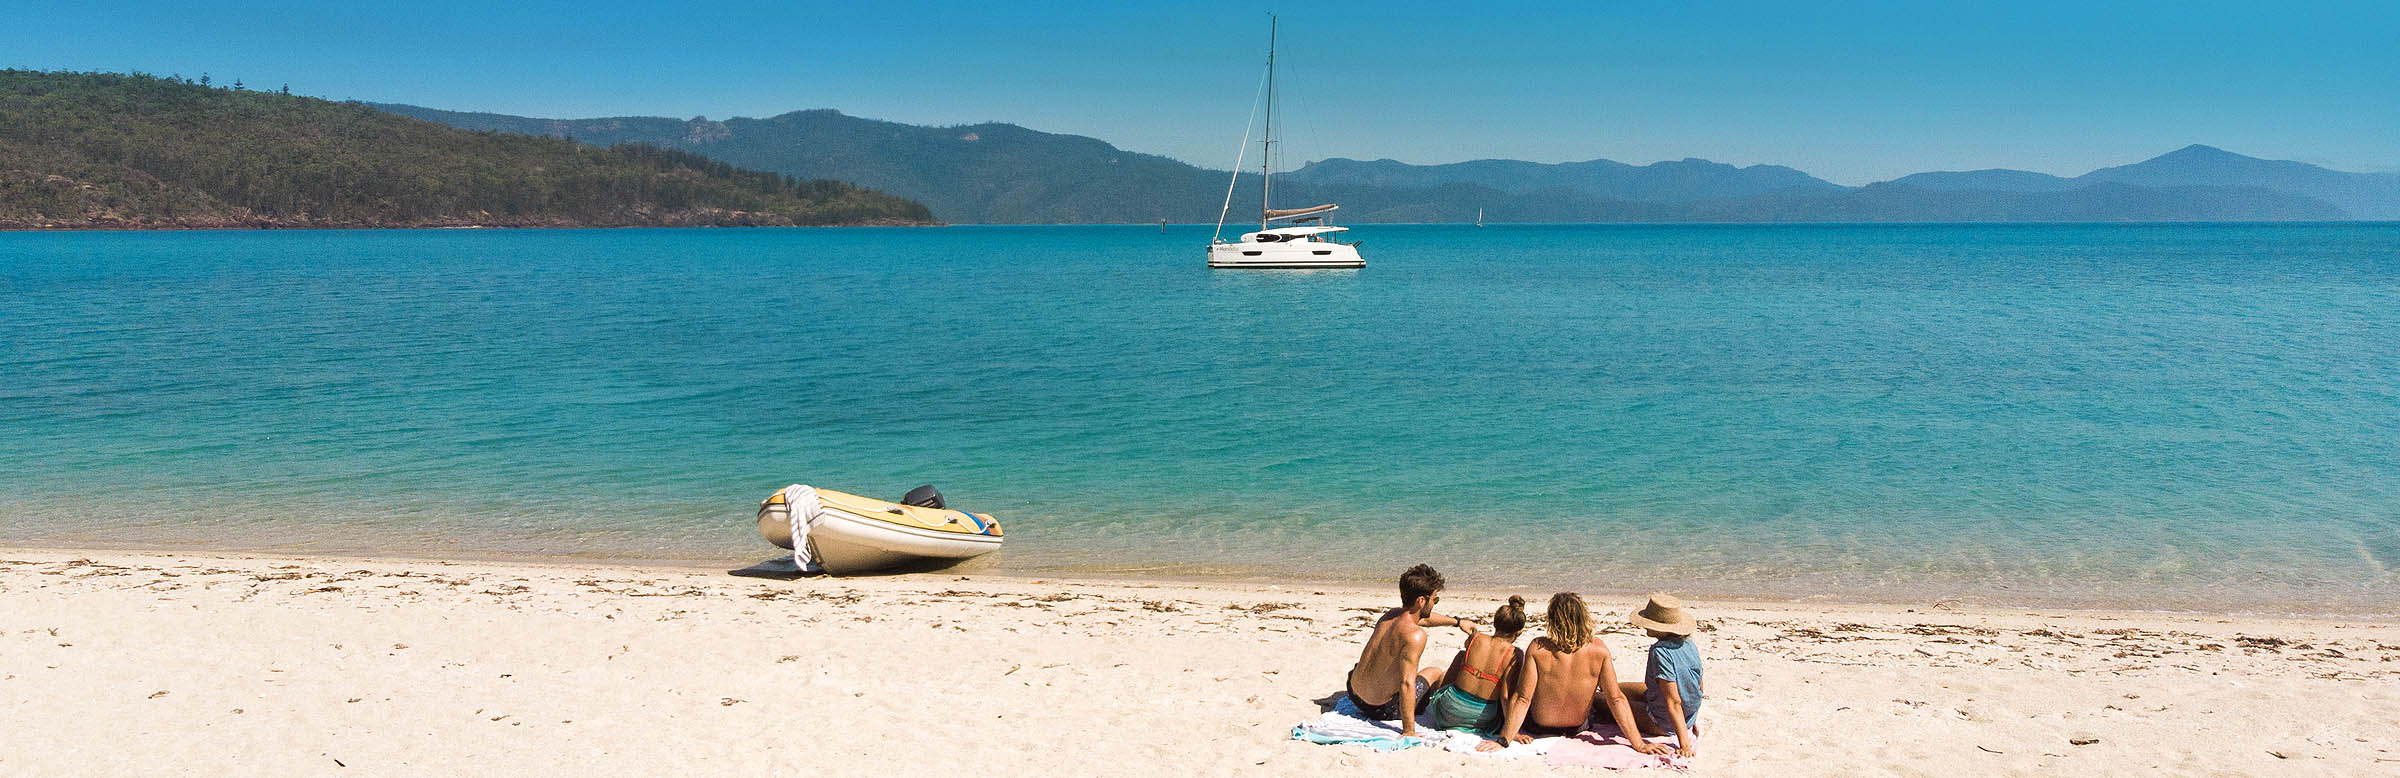 Relaxing on the beach in the Whitsunday Islands